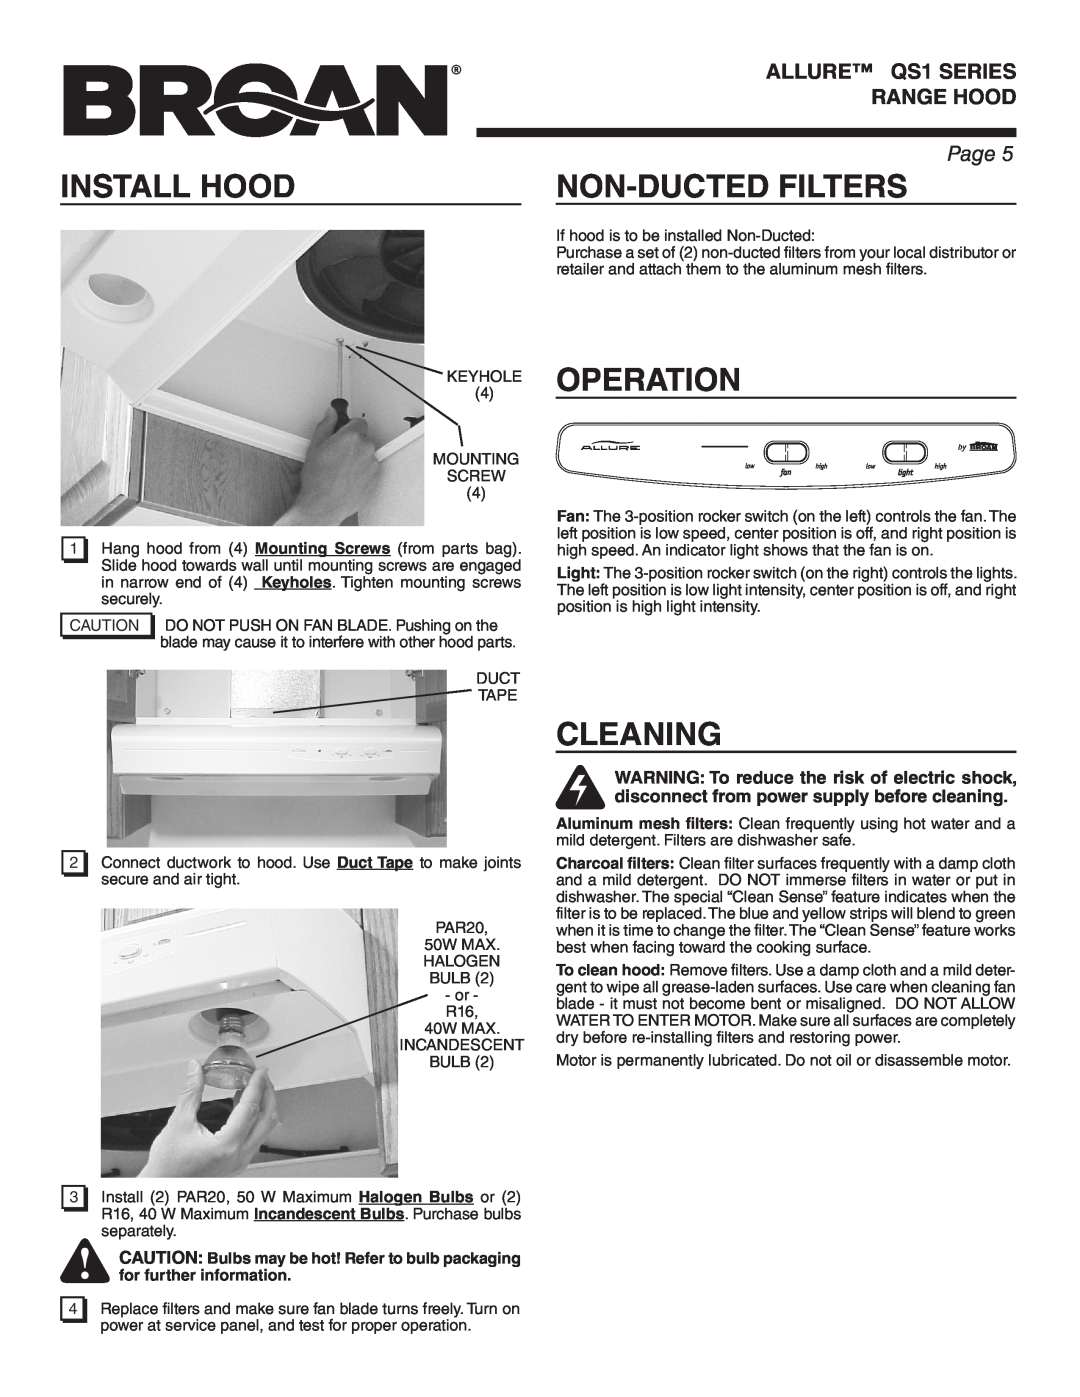 Broan QS130WW warranty Install Hood, Non-Ducted Filters, Operation, Cleaning, ALLURE QS1 SERIES RANGE HOOD, Page 